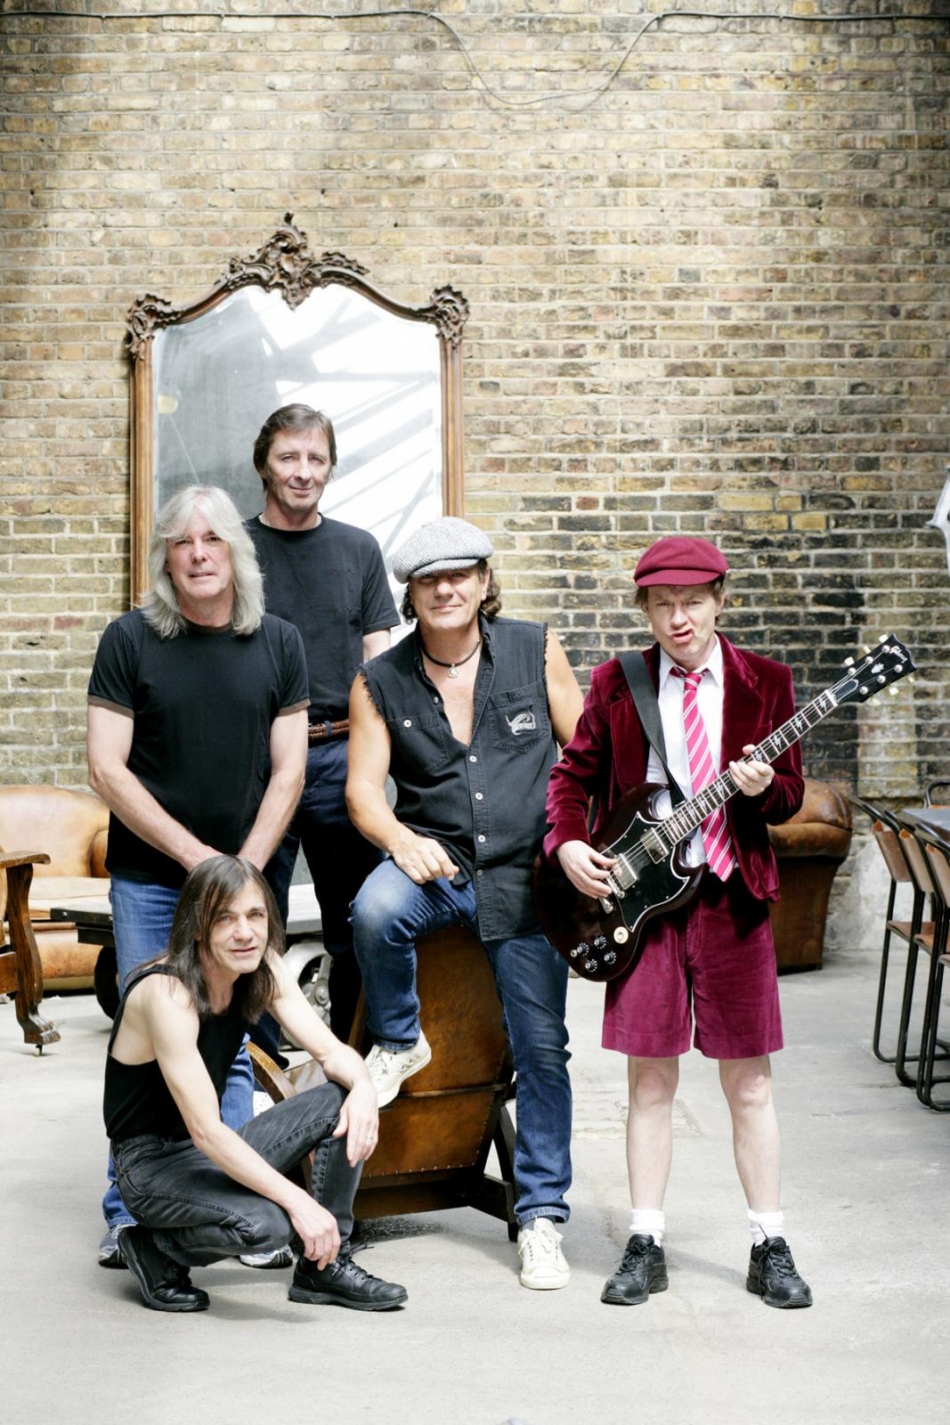 New Album from AC/DC in December